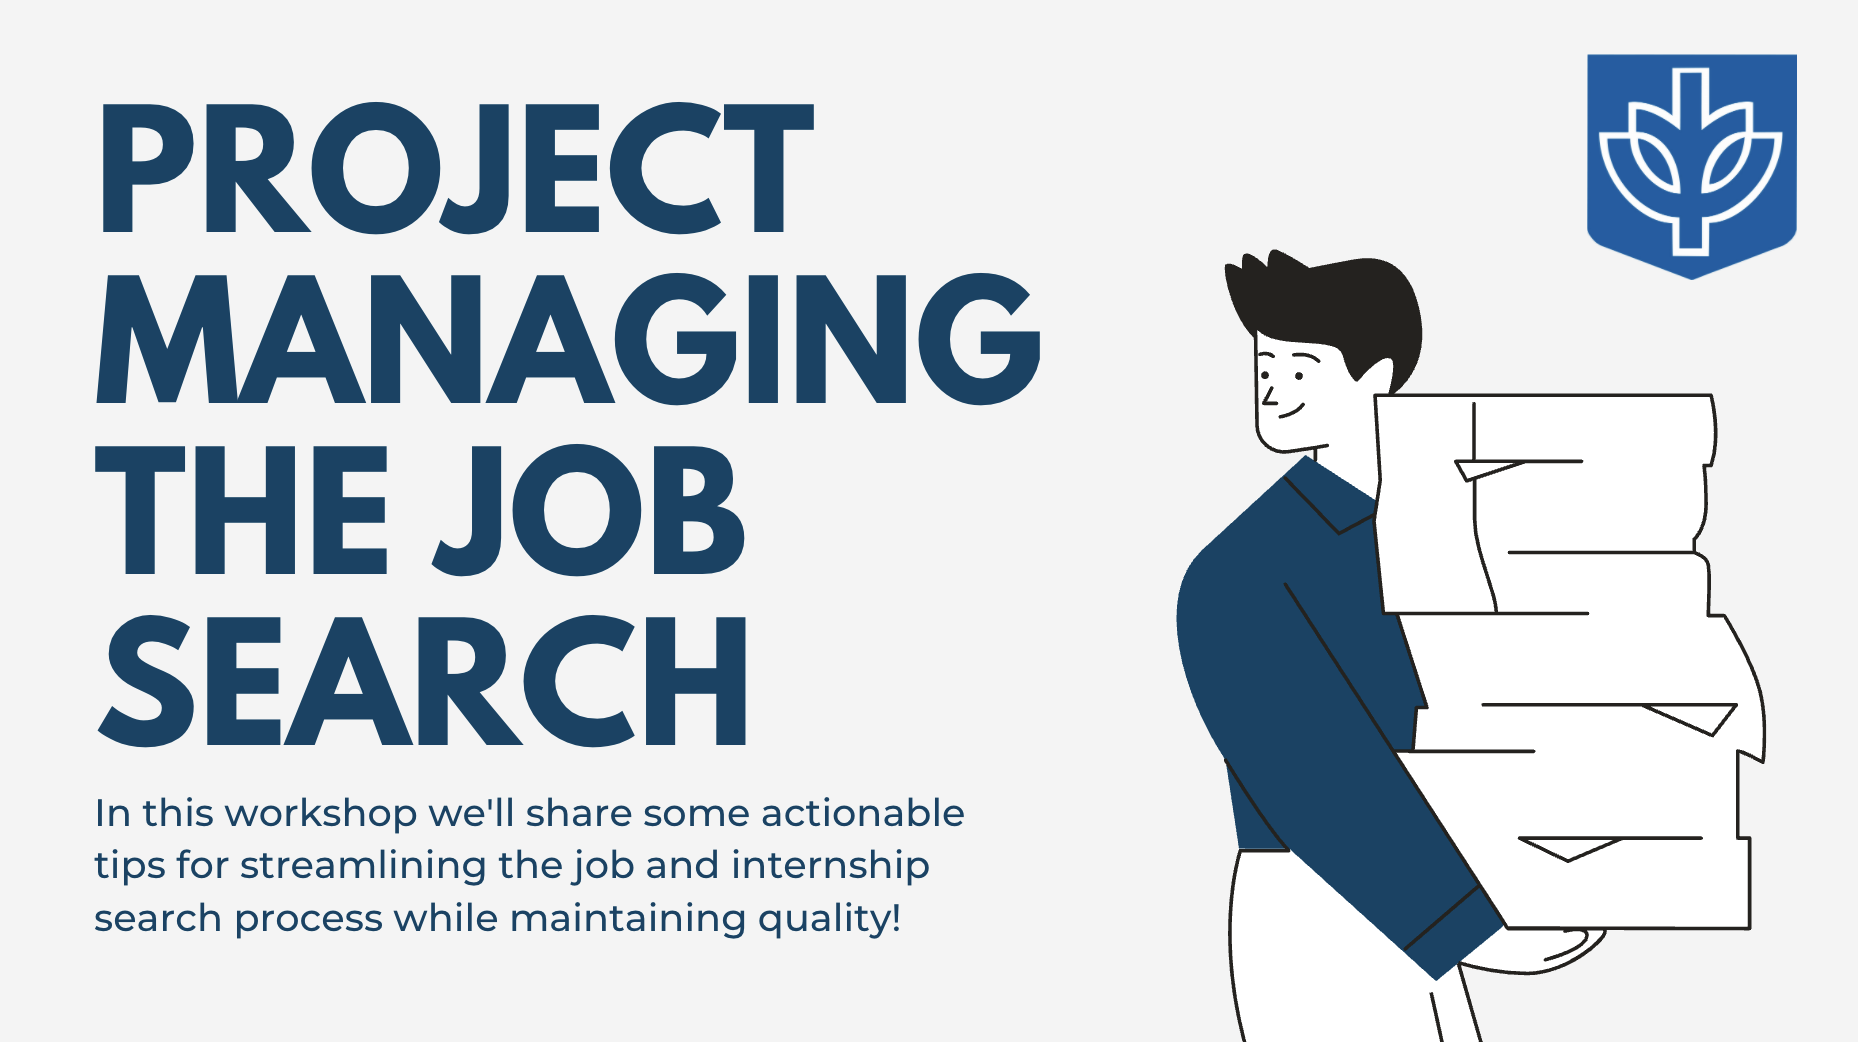 Project Managing the Job Search